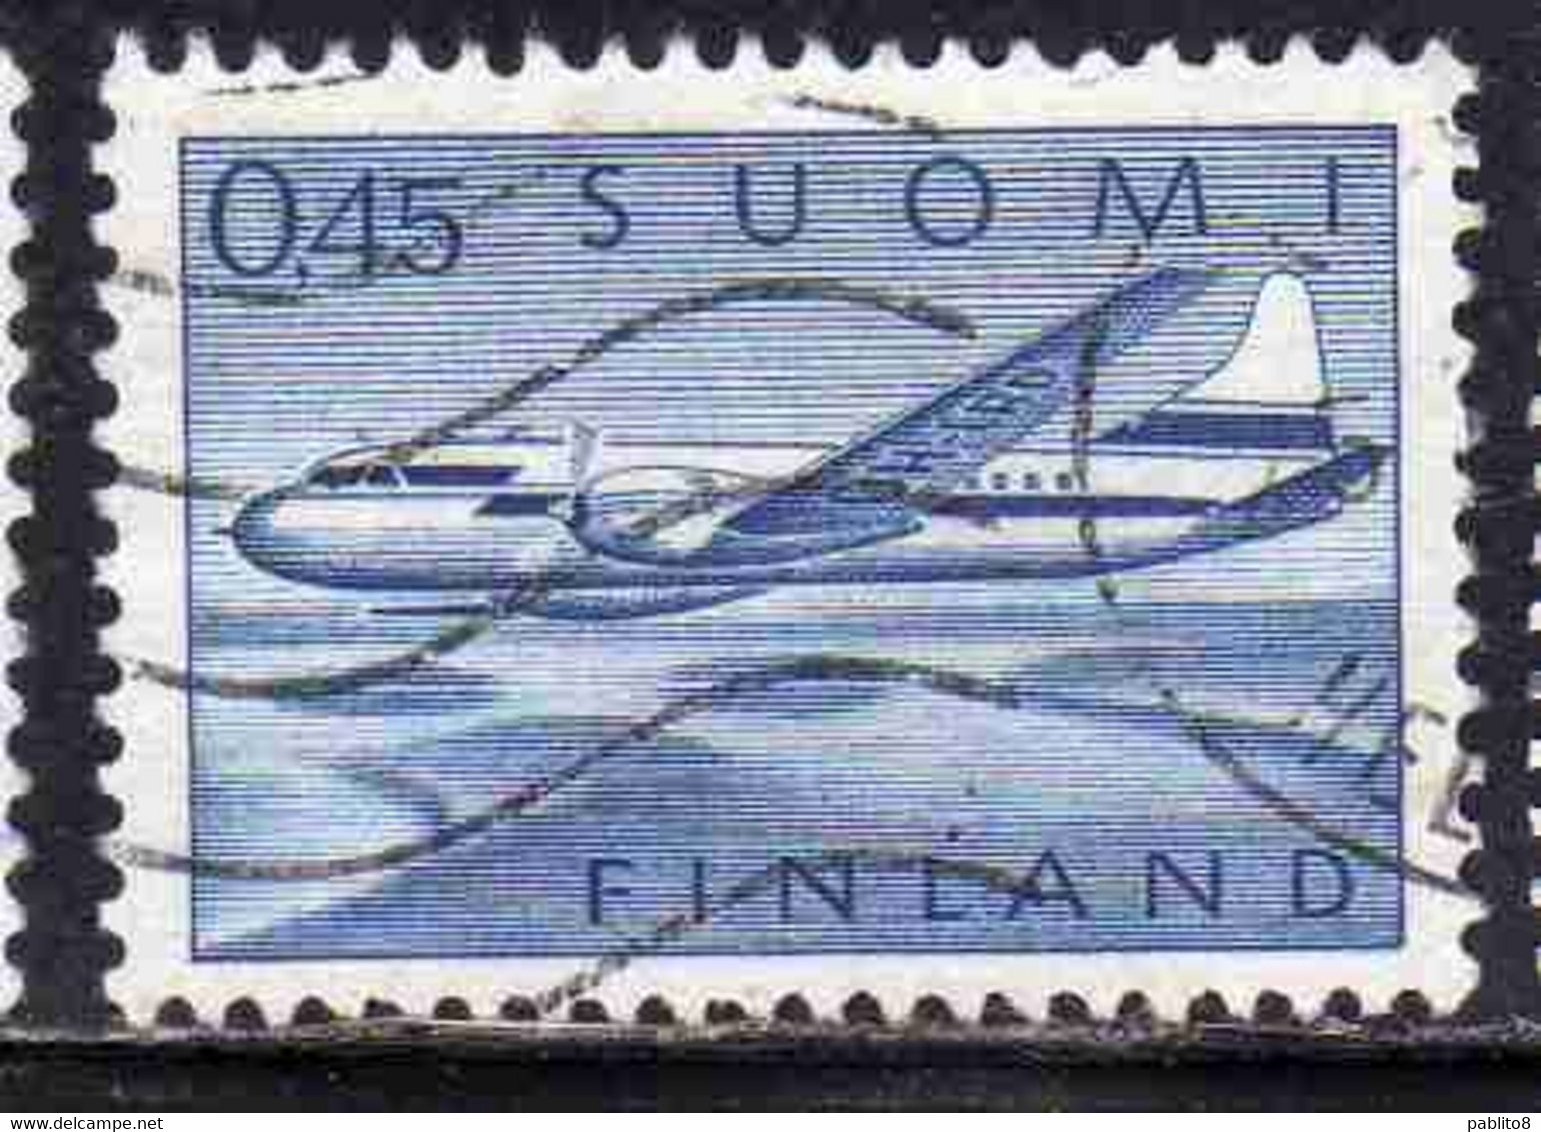 SUOMI FINLAND FINLANDIA FINLANDE 1963 AIR POST MAIL AIRMAIL CONVAIR OVER LAKES 0.45m 45p USED USATO OBLITERE' - Used Stamps